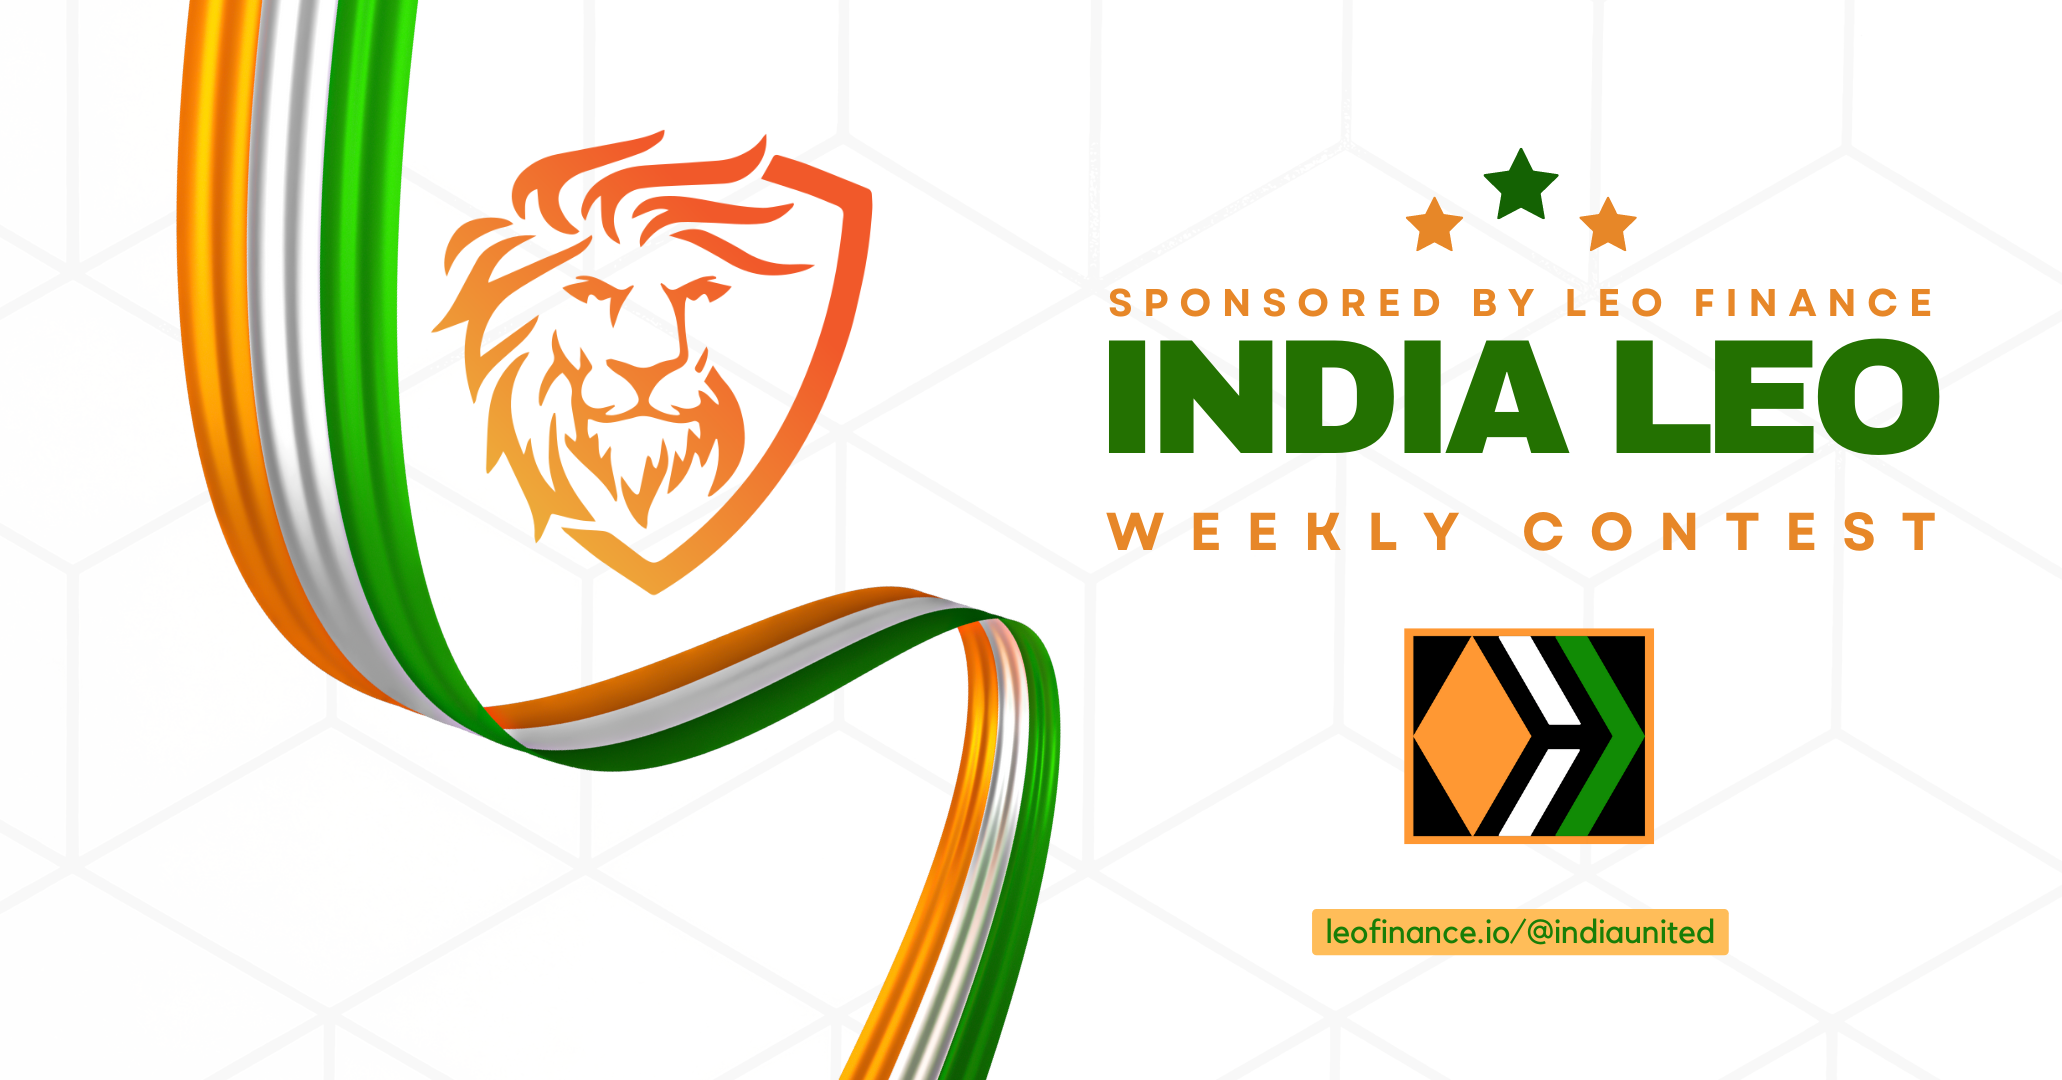 @indiaunited/india-leo-weekly-contest-announcing-winners-and-this-week-s-topic-7eksqu